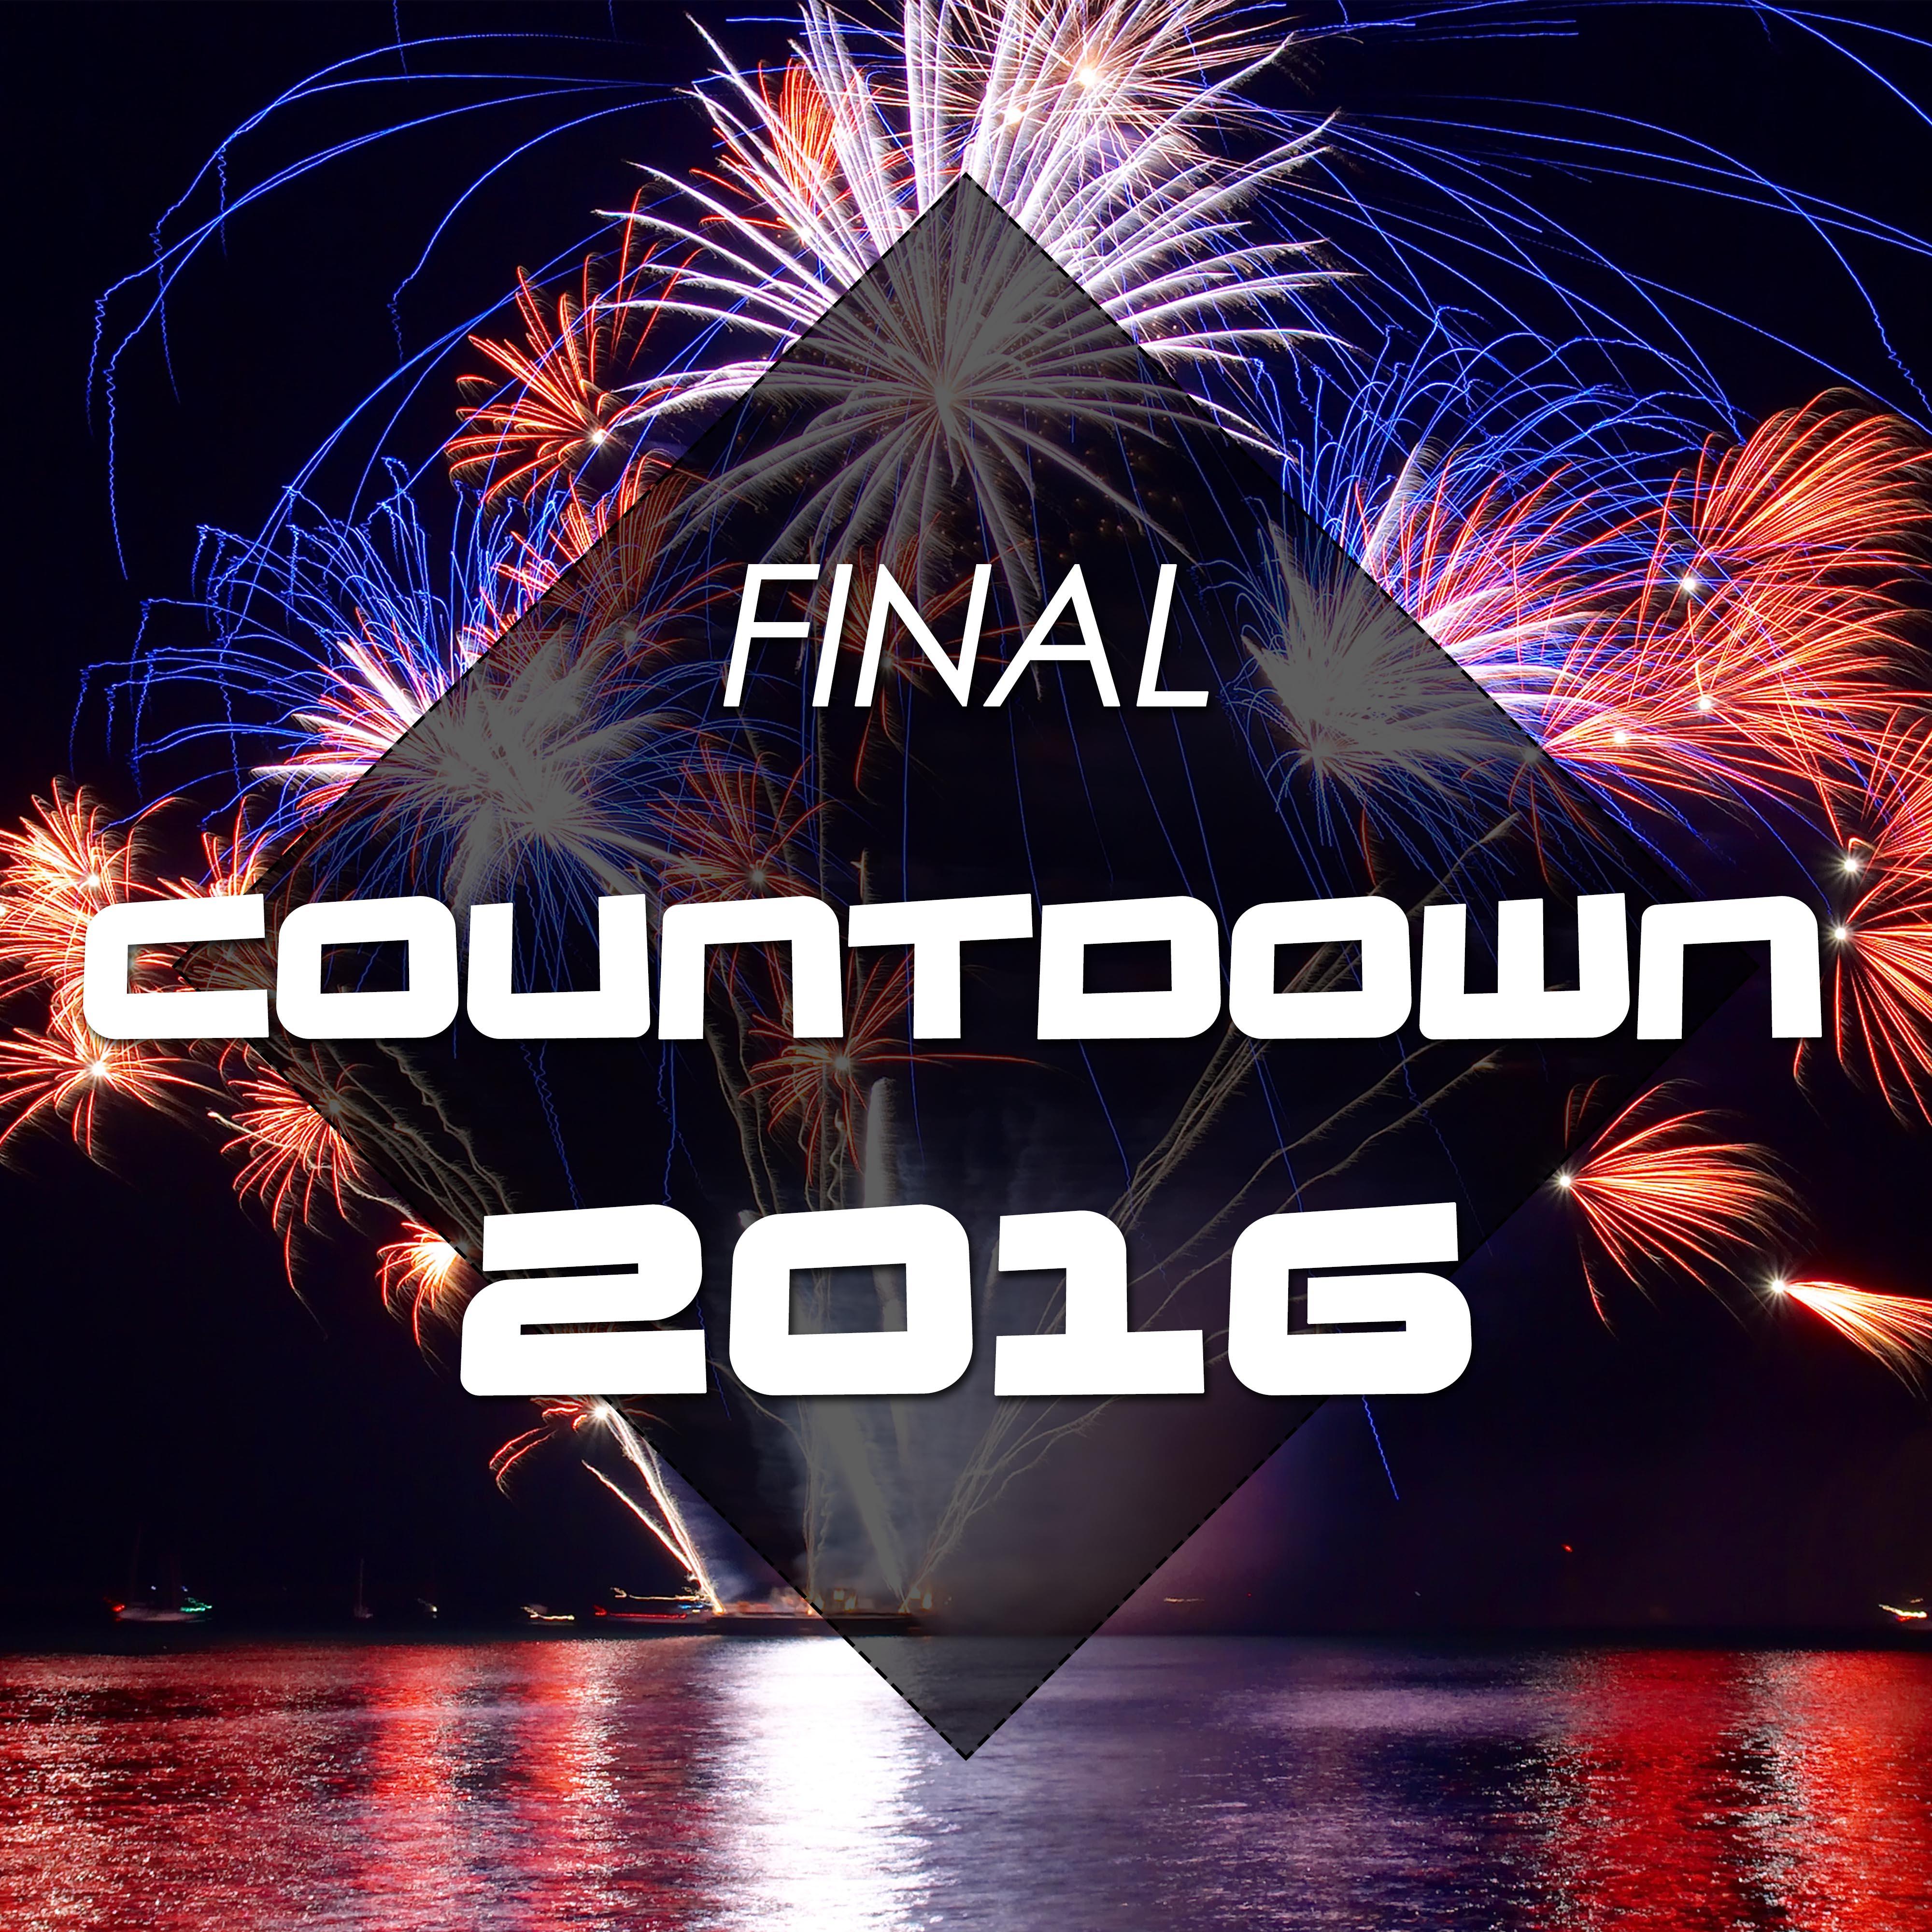 Final Countdown: Get Everyone at the New Year's Eve party Up on their feet with the Best Soft House, Chillout Music and Celebration Songs